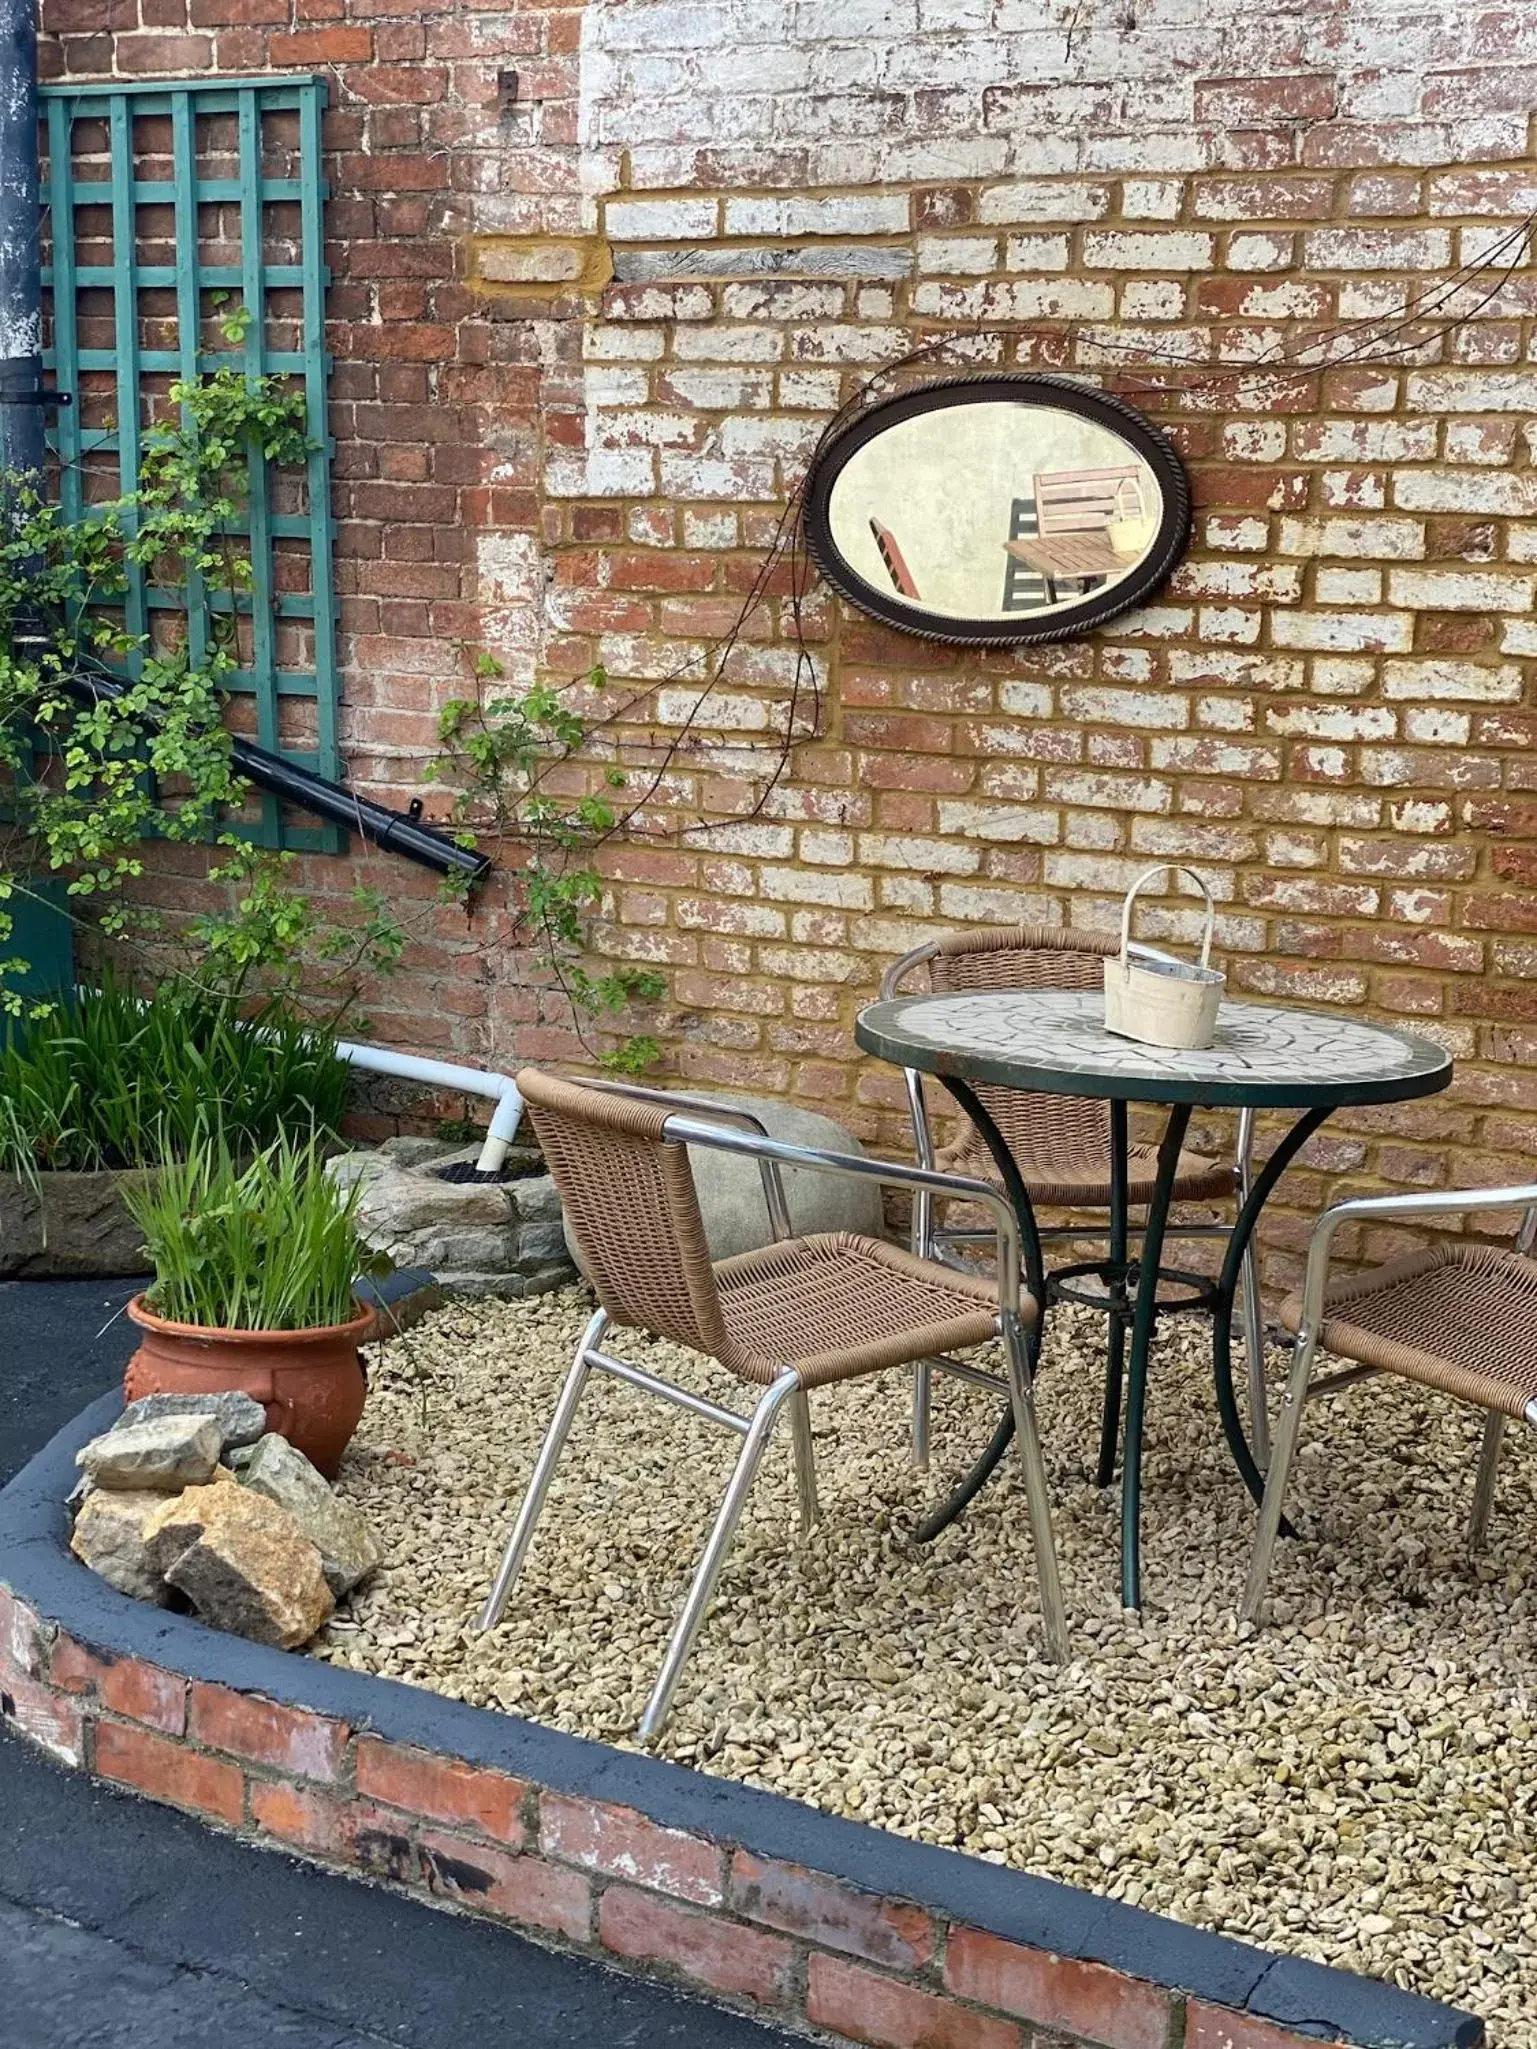 Patio in The Ilchester Arms Hotel, Ilchester Somerset